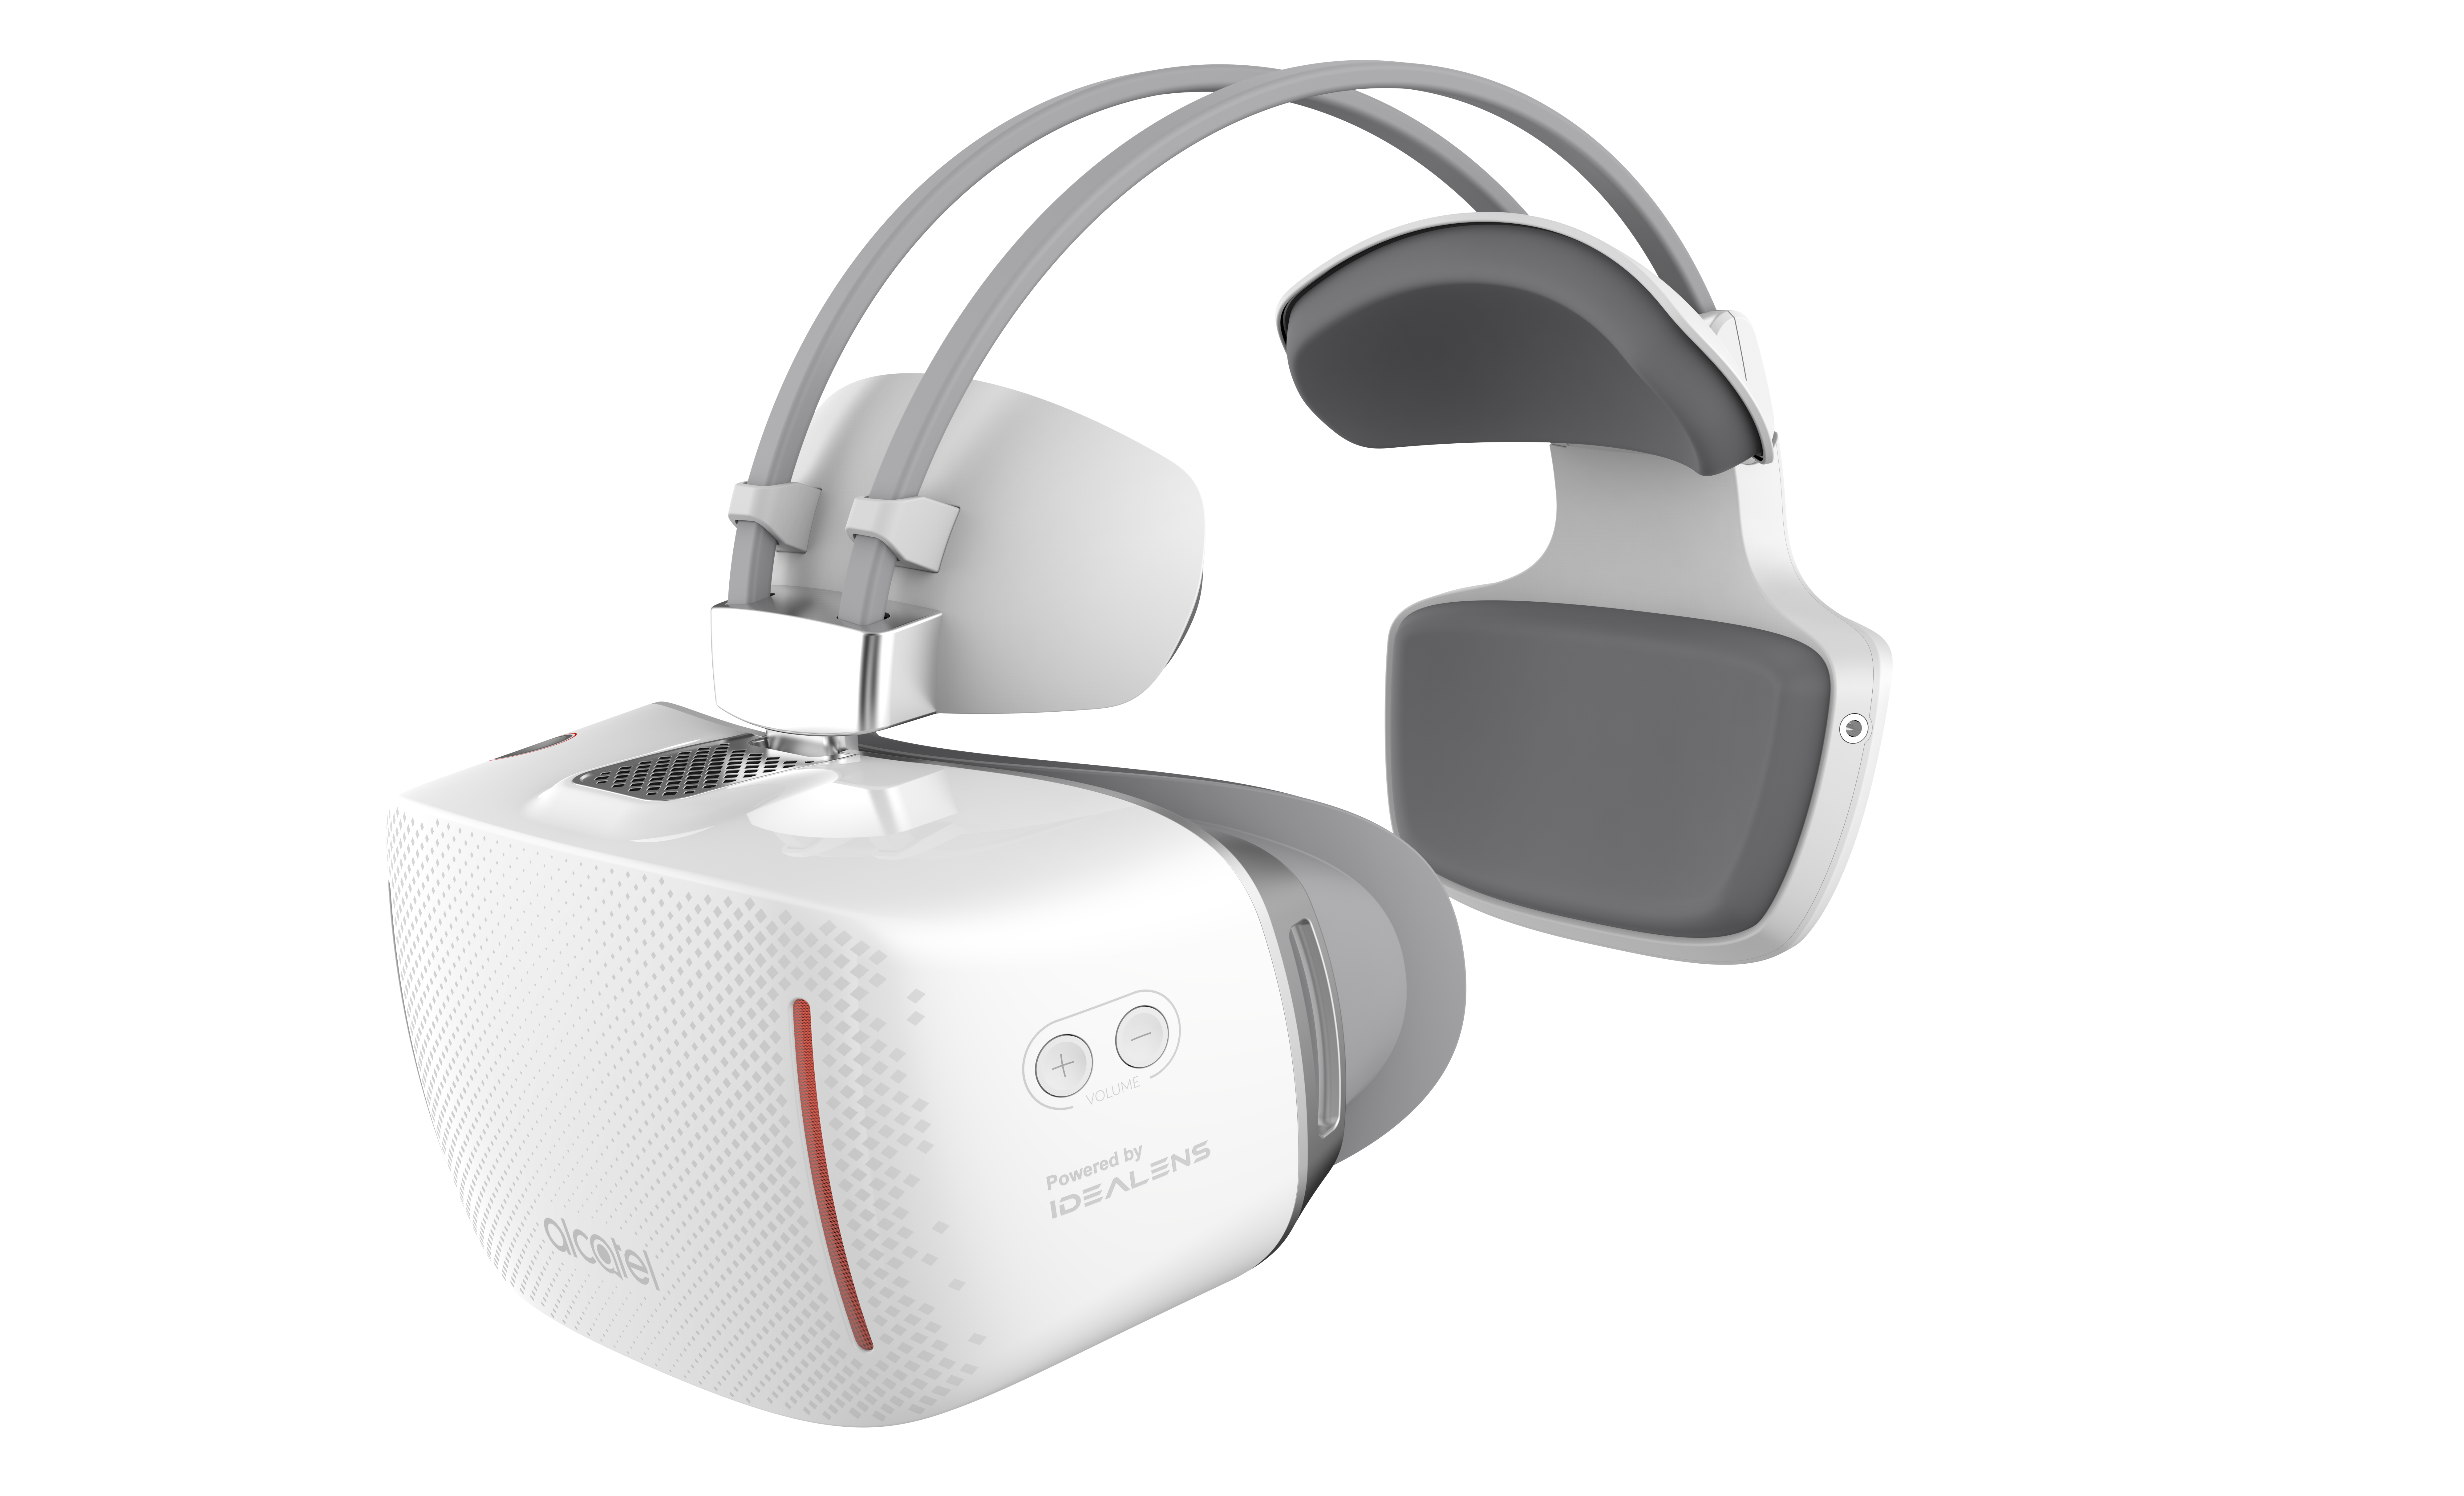 alcatel vision vr headset hopes to better the gear vr image 1